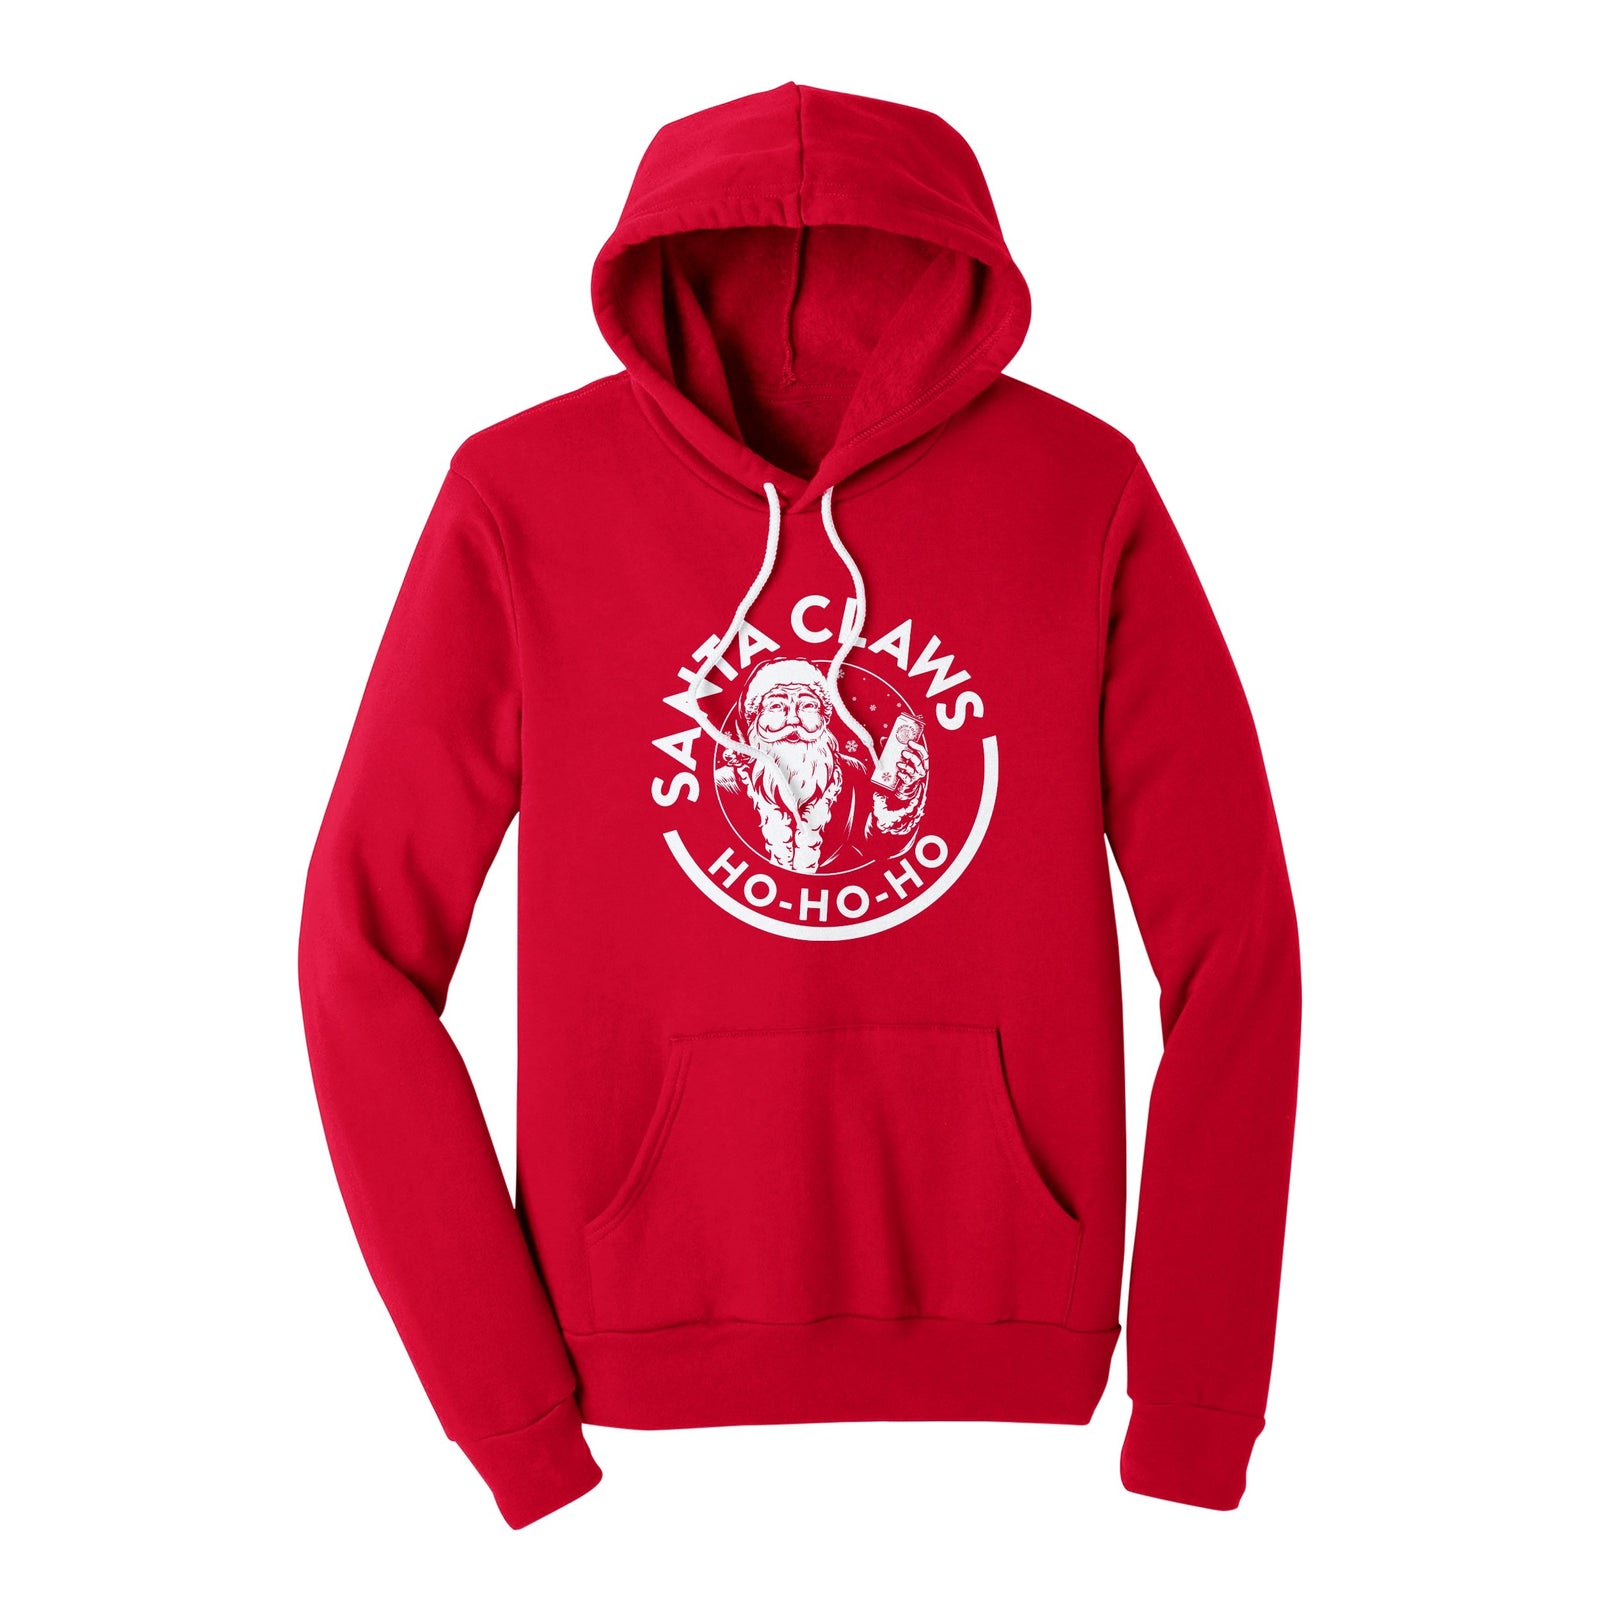 //cdn.shopify.com/s/files/1/0274/2488/2766/products/santa-claws-hoodie-266872_5000x.jpg?v=1675243102 5000w,
    //cdn.shopify.com/s/files/1/0274/2488/2766/products/santa-claws-hoodie-266872_4500x.jpg?v=1675243102 4500w,
    //cdn.shopify.com/s/files/1/0274/2488/2766/products/santa-claws-hoodie-266872_4000x.jpg?v=1675243102 4000w,
    //cdn.shopify.com/s/files/1/0274/2488/2766/products/santa-claws-hoodie-266872_3500x.jpg?v=1675243102 3500w,
    //cdn.shopify.com/s/files/1/0274/2488/2766/products/santa-claws-hoodie-266872_3000x.jpg?v=1675243102 3000w,
    //cdn.shopify.com/s/files/1/0274/2488/2766/products/santa-claws-hoodie-266872_2500x.jpg?v=1675243102 2500w,
    //cdn.shopify.com/s/files/1/0274/2488/2766/products/santa-claws-hoodie-266872_2000x.jpg?v=1675243102 2000w,
    //cdn.shopify.com/s/files/1/0274/2488/2766/products/santa-claws-hoodie-266872_1800x.jpg?v=1675243102 1800w,
    //cdn.shopify.com/s/files/1/0274/2488/2766/products/santa-claws-hoodie-266872_1600x.jpg?v=1675243102 1600w,
    //cdn.shopify.com/s/files/1/0274/2488/2766/products/santa-claws-hoodie-266872_1400x.jpg?v=1675243102 1400w,
    //cdn.shopify.com/s/files/1/0274/2488/2766/products/santa-claws-hoodie-266872_1200x.jpg?v=1675243102 1200w,
    //cdn.shopify.com/s/files/1/0274/2488/2766/products/santa-claws-hoodie-266872_1000x.jpg?v=1675243102 1000w,
    //cdn.shopify.com/s/files/1/0274/2488/2766/products/santa-claws-hoodie-266872_800x.jpg?v=1675243102 800w,
    //cdn.shopify.com/s/files/1/0274/2488/2766/products/santa-claws-hoodie-266872_600x.jpg?v=1675243102 600w,
    //cdn.shopify.com/s/files/1/0274/2488/2766/products/santa-claws-hoodie-266872_400x.jpg?v=1675243102 400w,
    //cdn.shopify.com/s/files/1/0274/2488/2766/products/santa-claws-hoodie-266872_200x.jpg?v=1675243102 200w